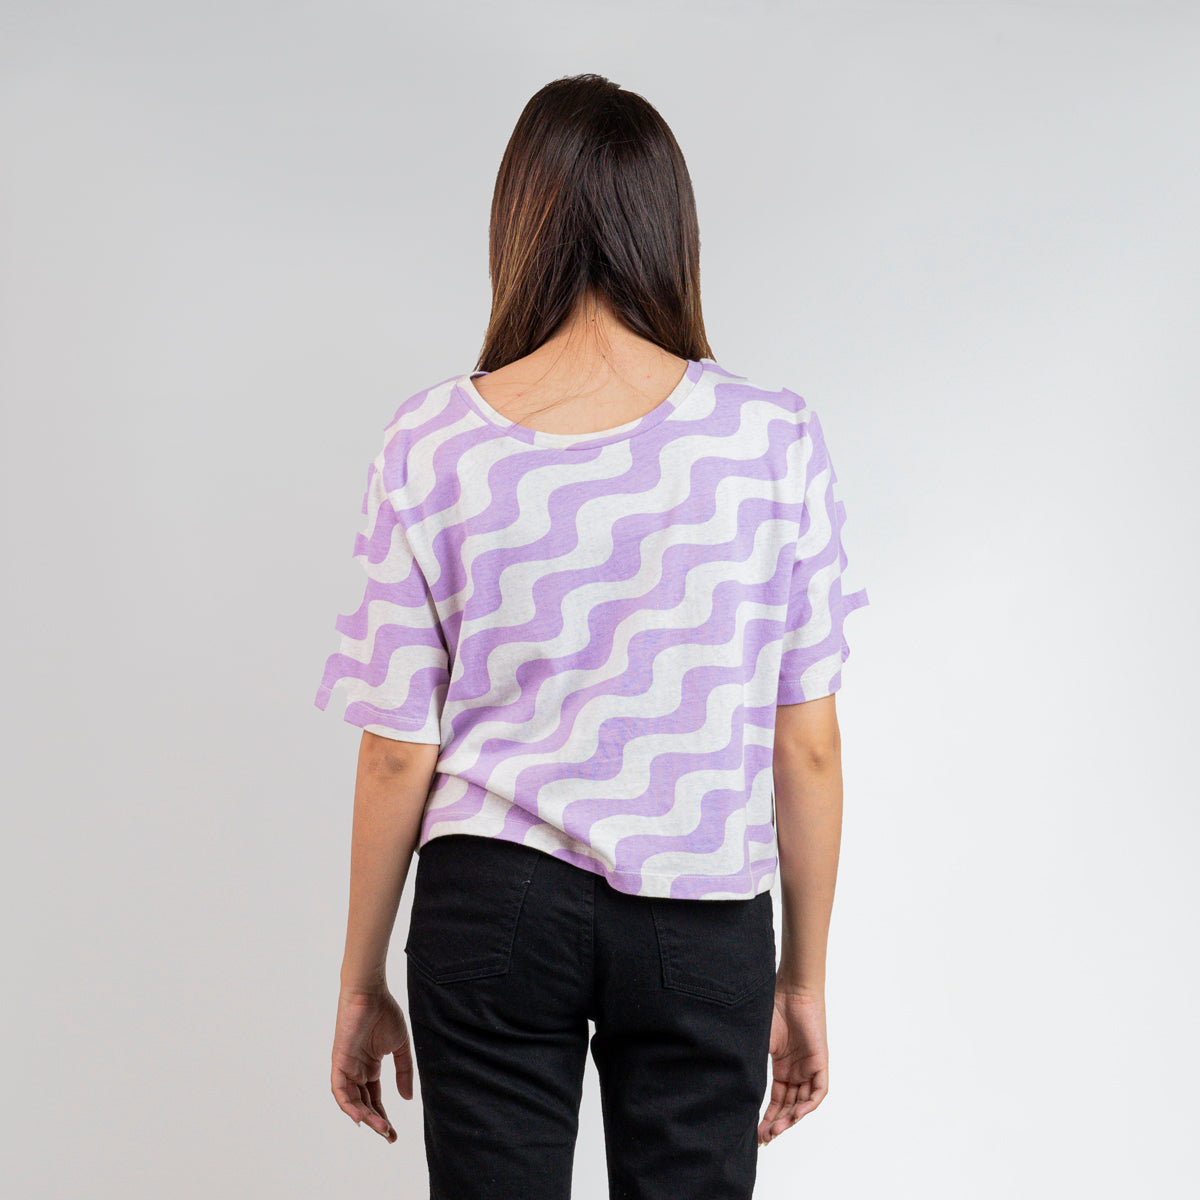 Relaxed Fit Single jersey White & Purple T-Shirt